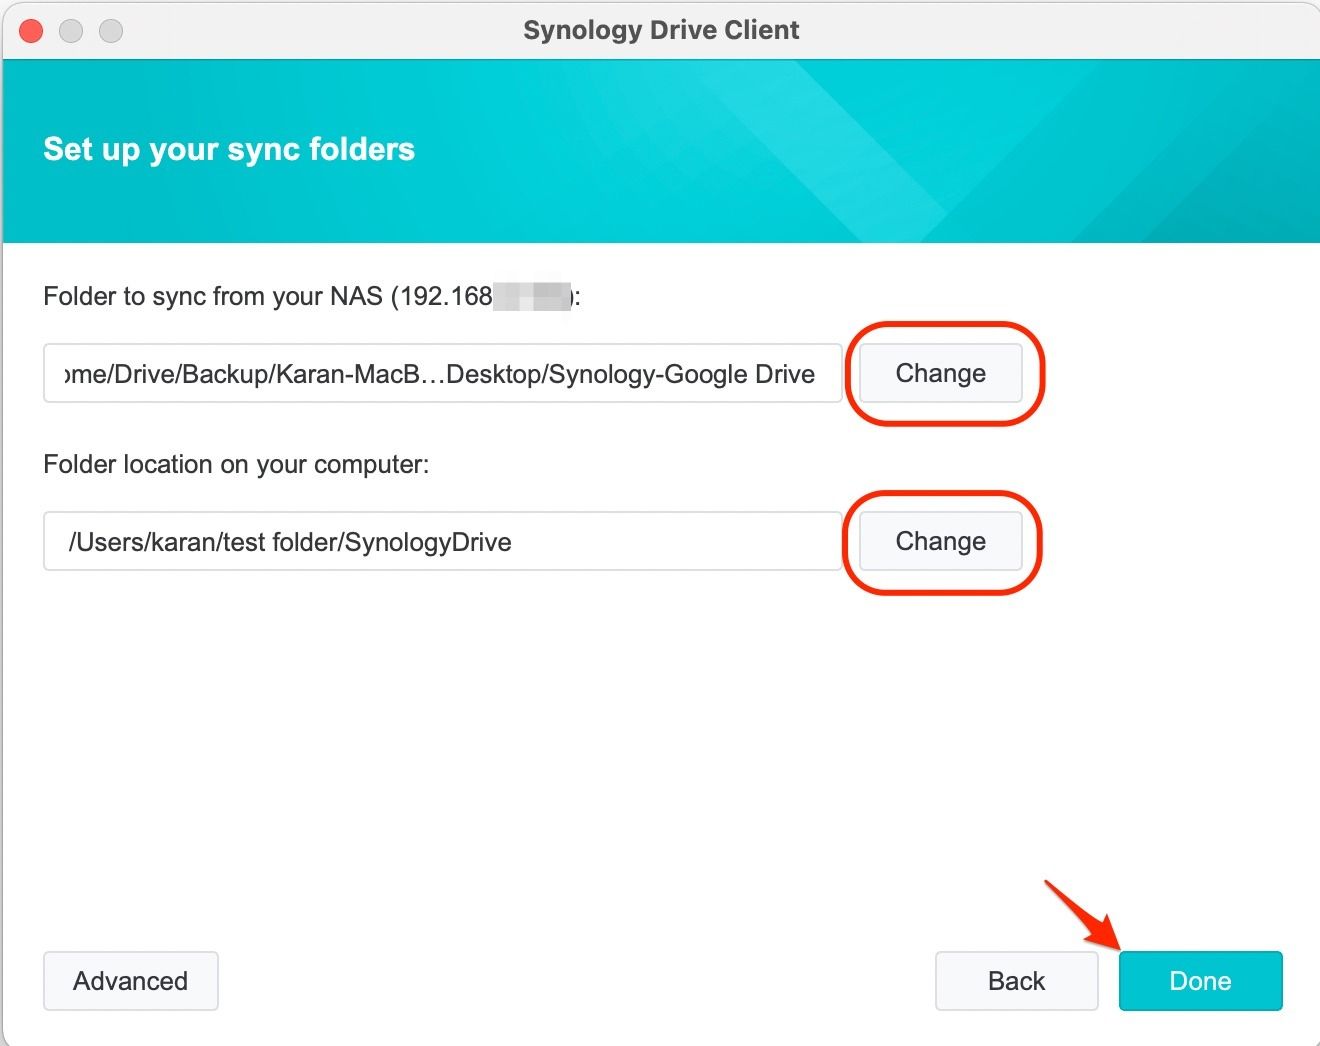 Screenshot shows the next step in the Drive Client sync option, showing locations for where to sync from and where to sync to.